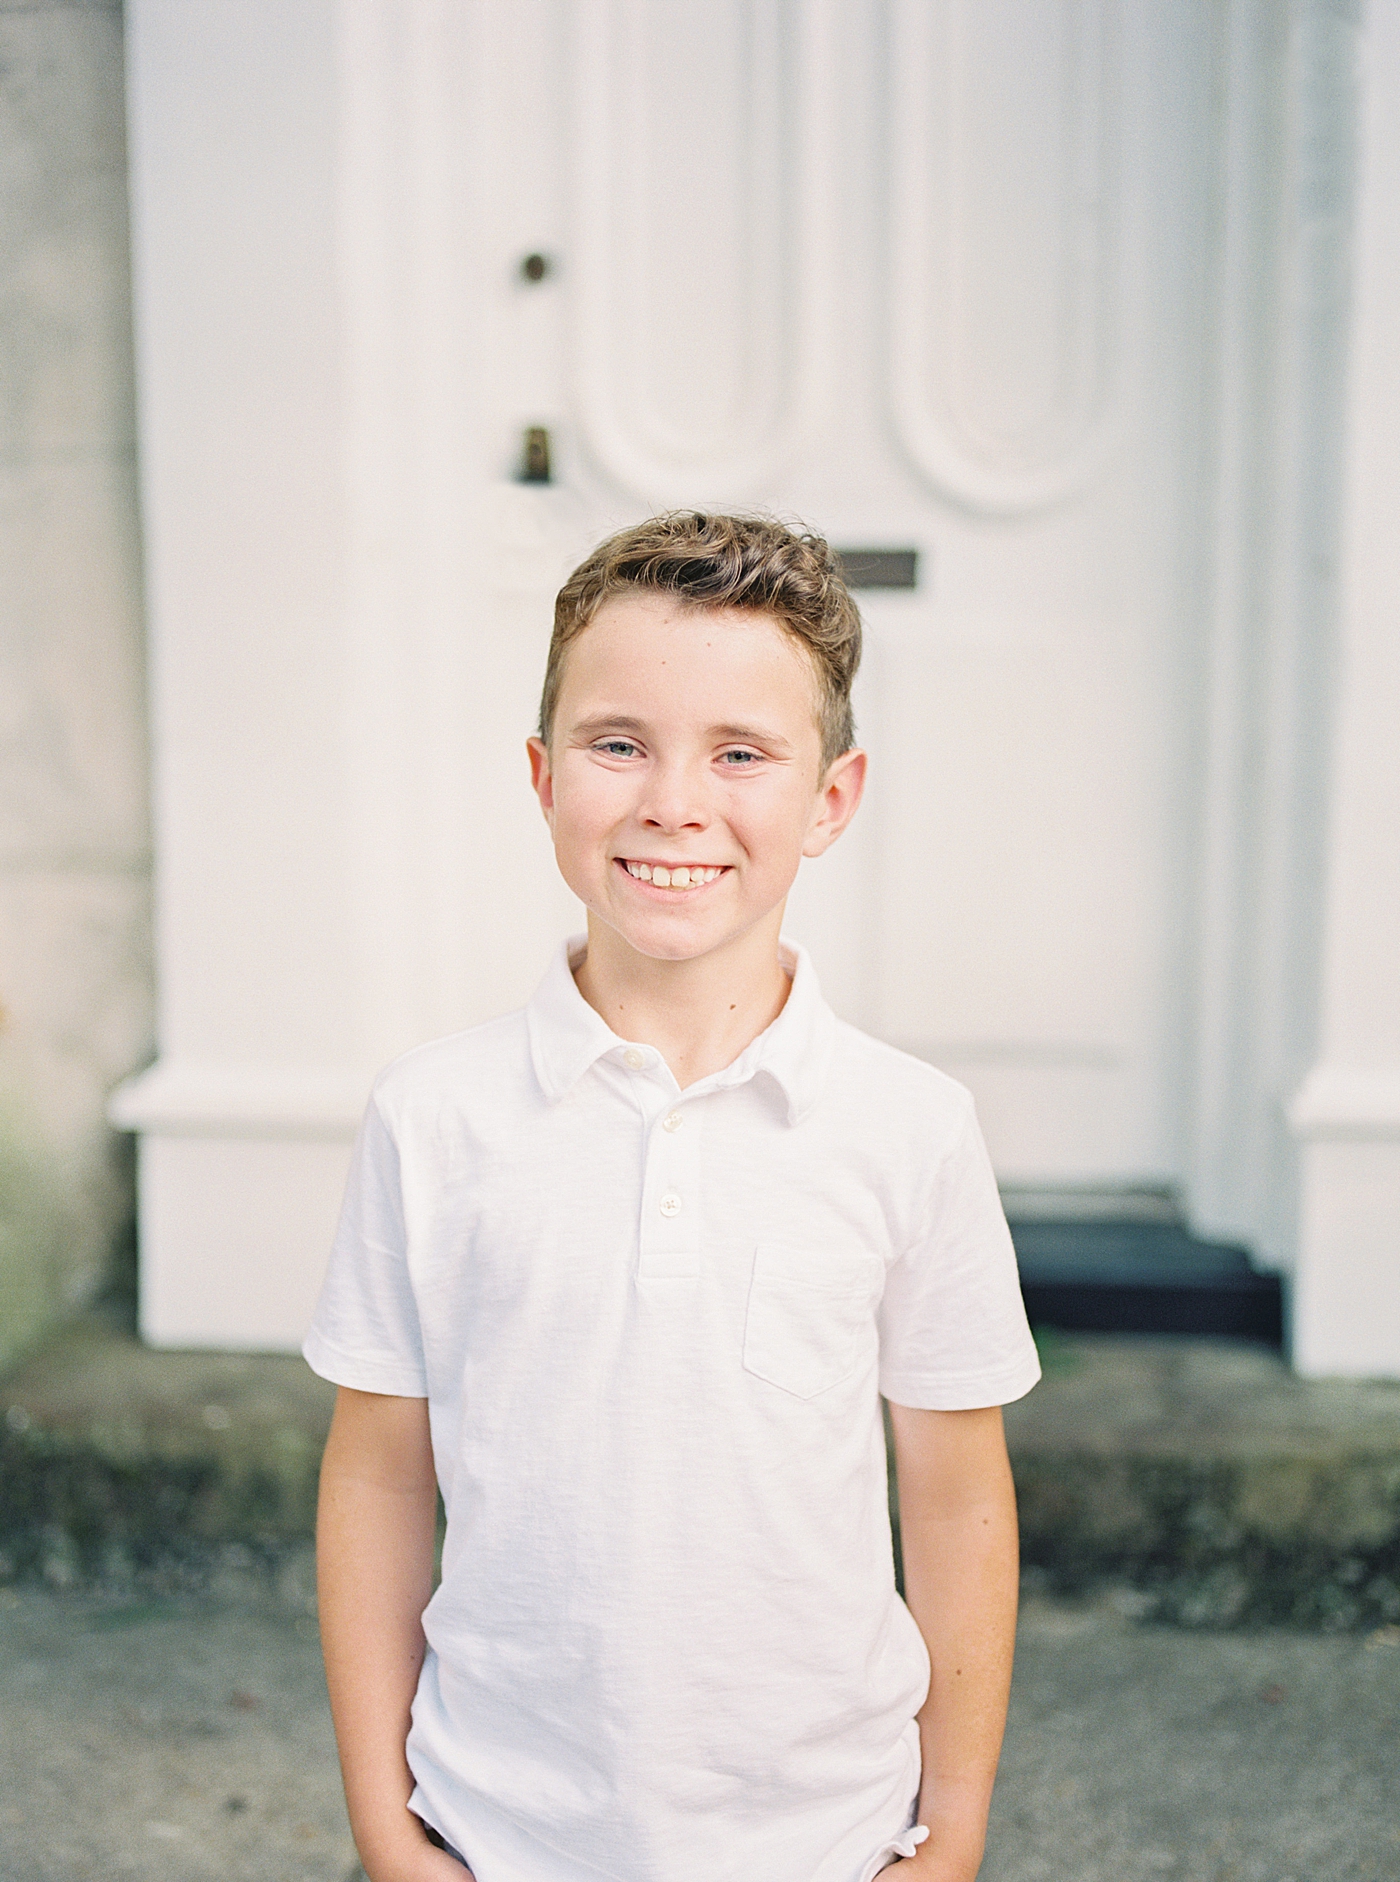 Little boy in a white shirt smiling | Photo by Caitlyn Motycka Photography